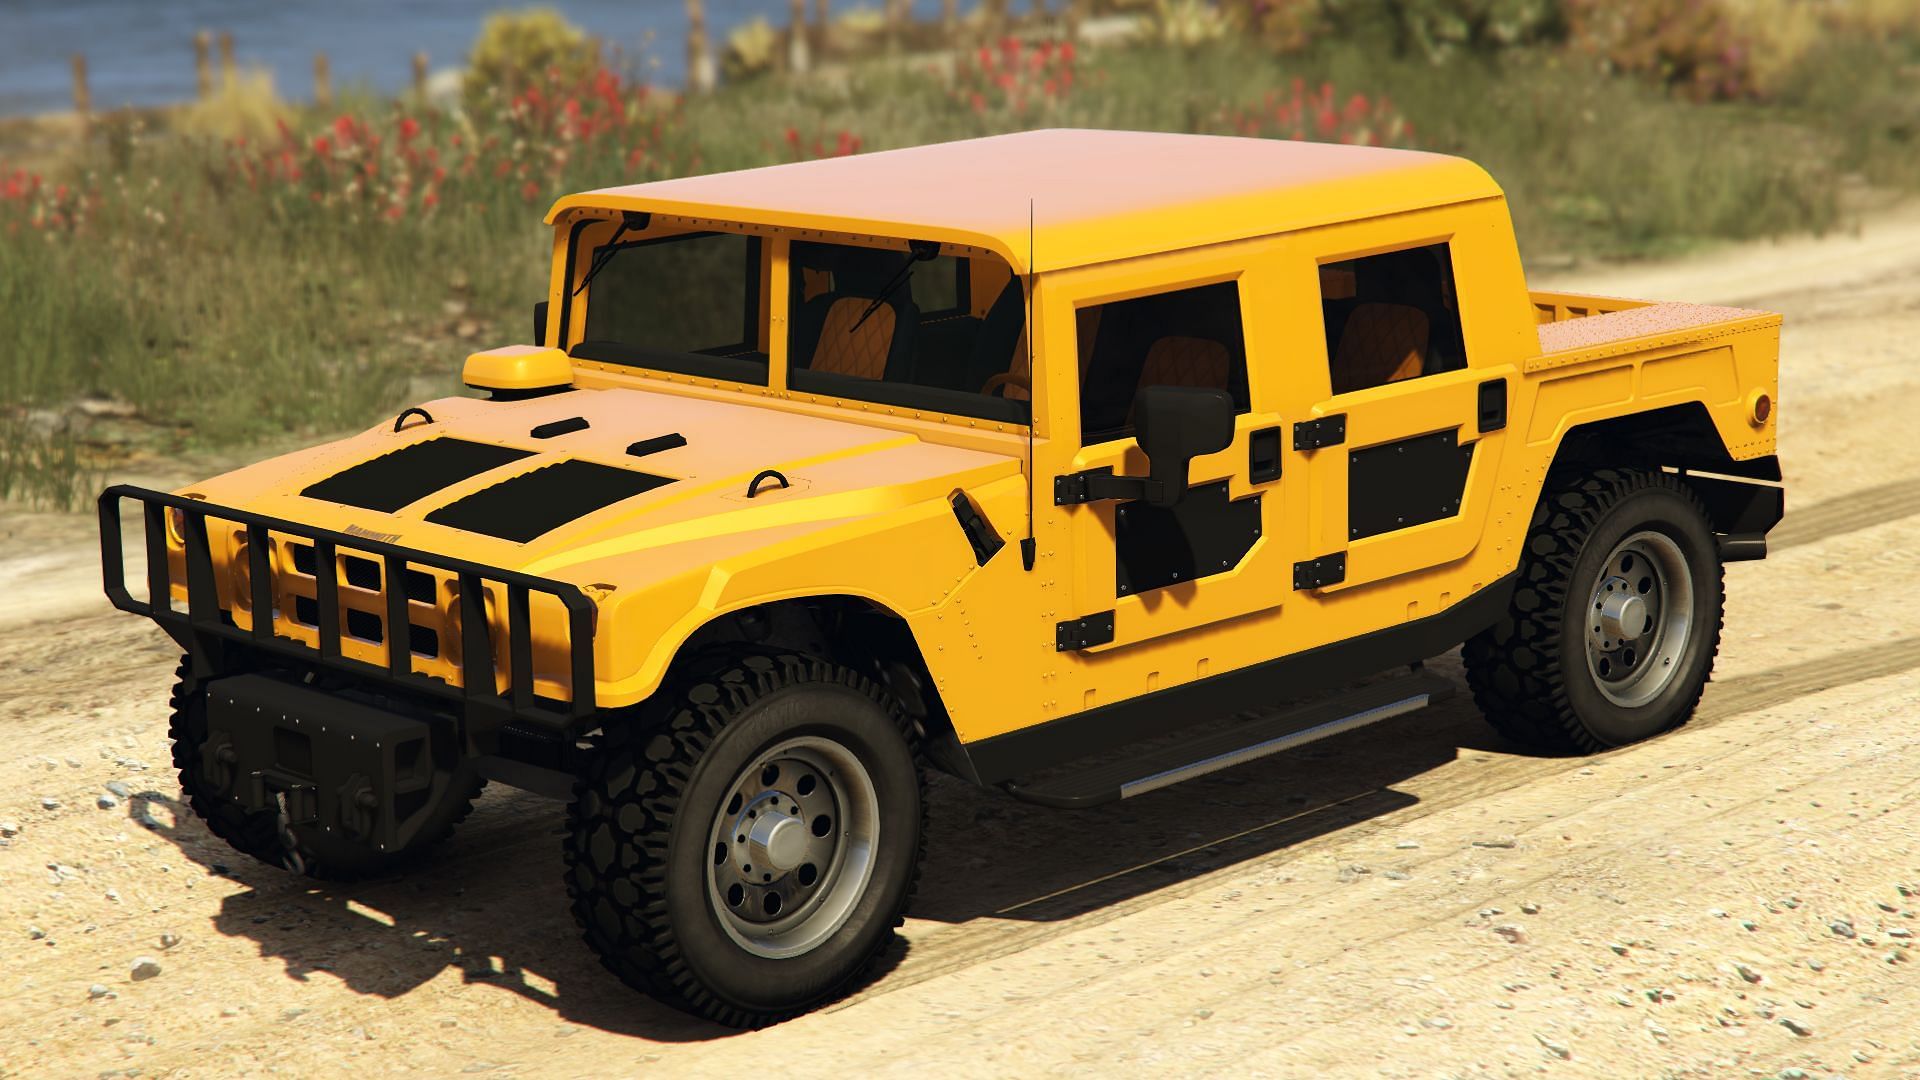 The Patriot Mil-Spec is the latest vehicle added to GTA Online (Image via Rockstar Games)